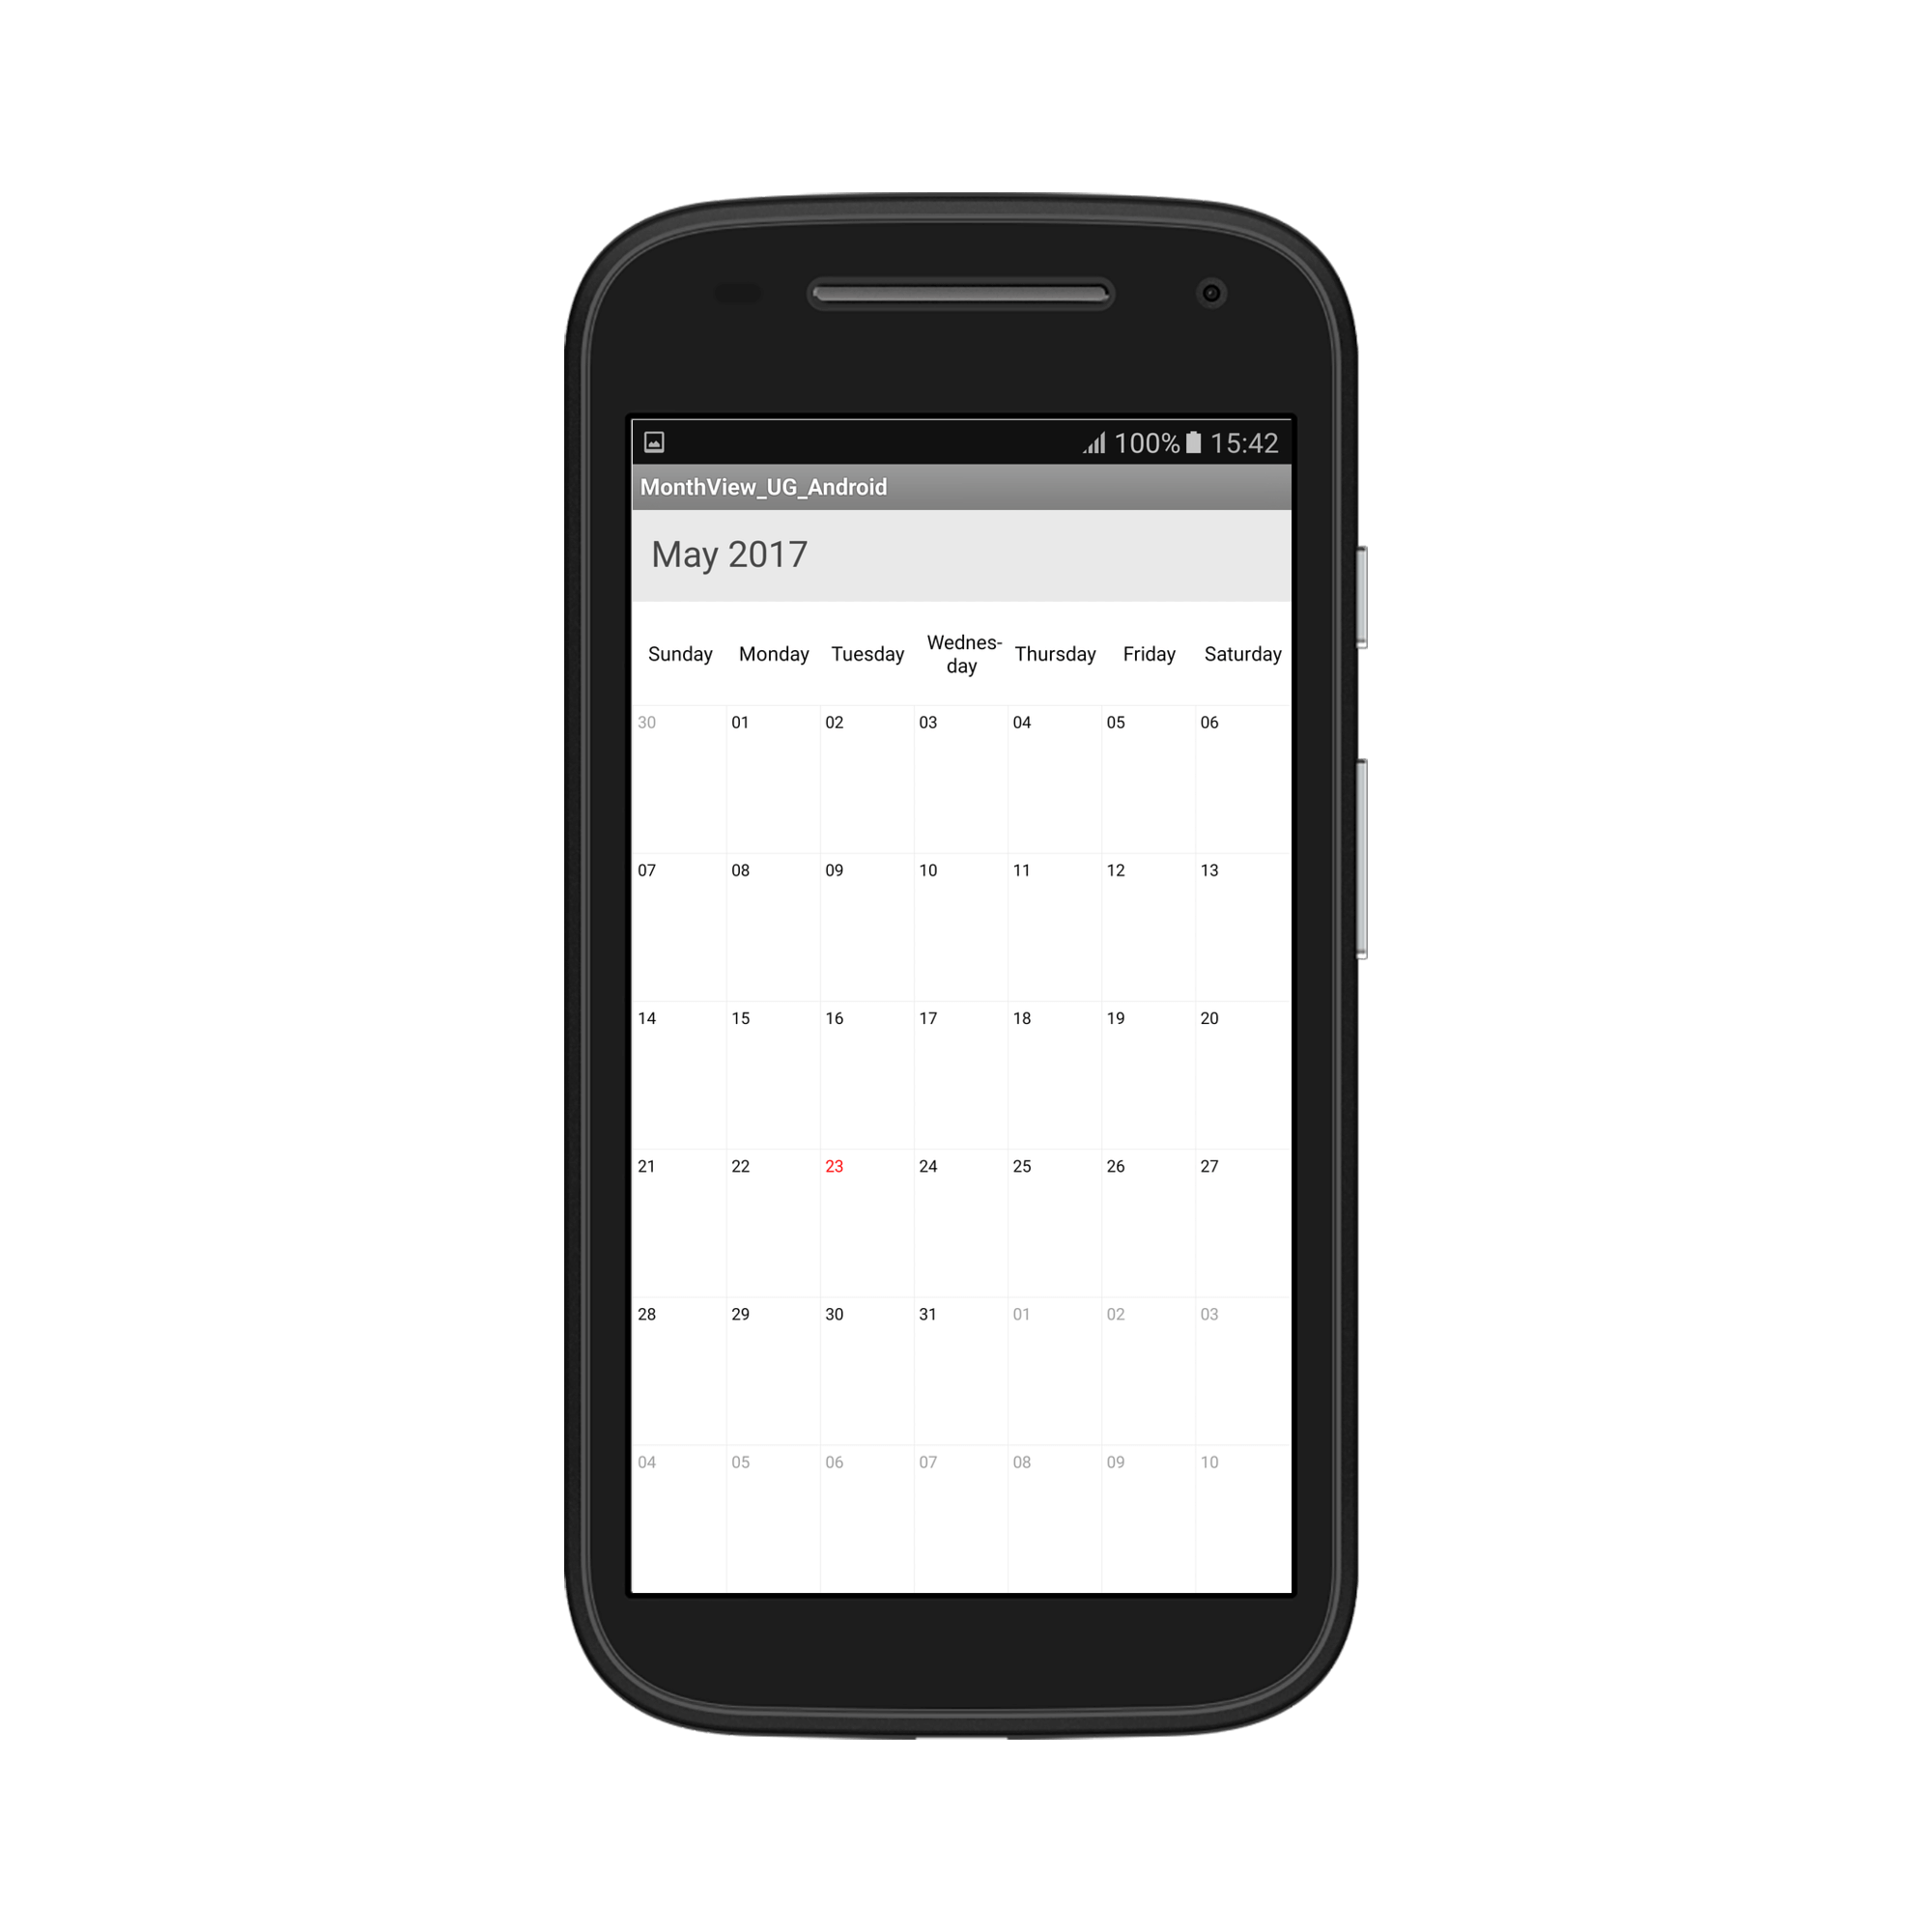 Month label formatting in schedule xamarin android